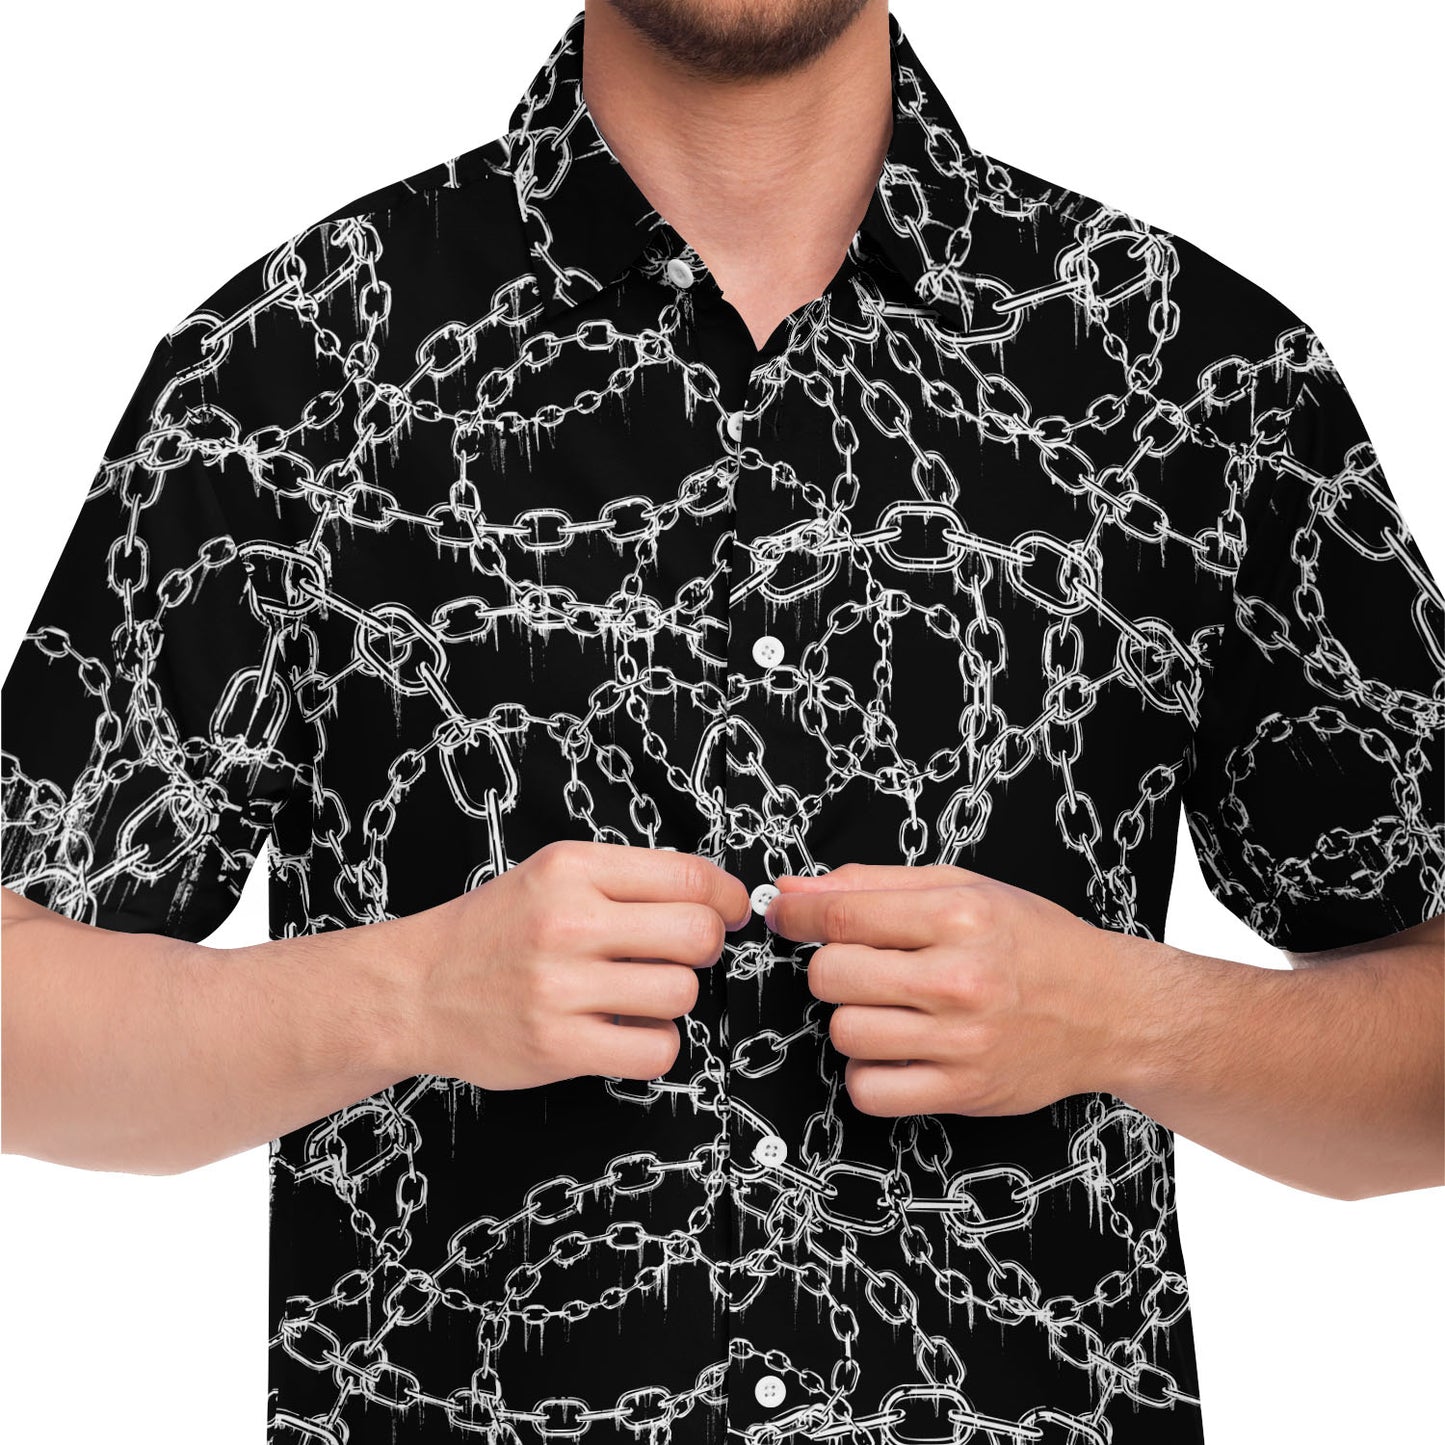 Chained Personalized short sleeve button down shirt